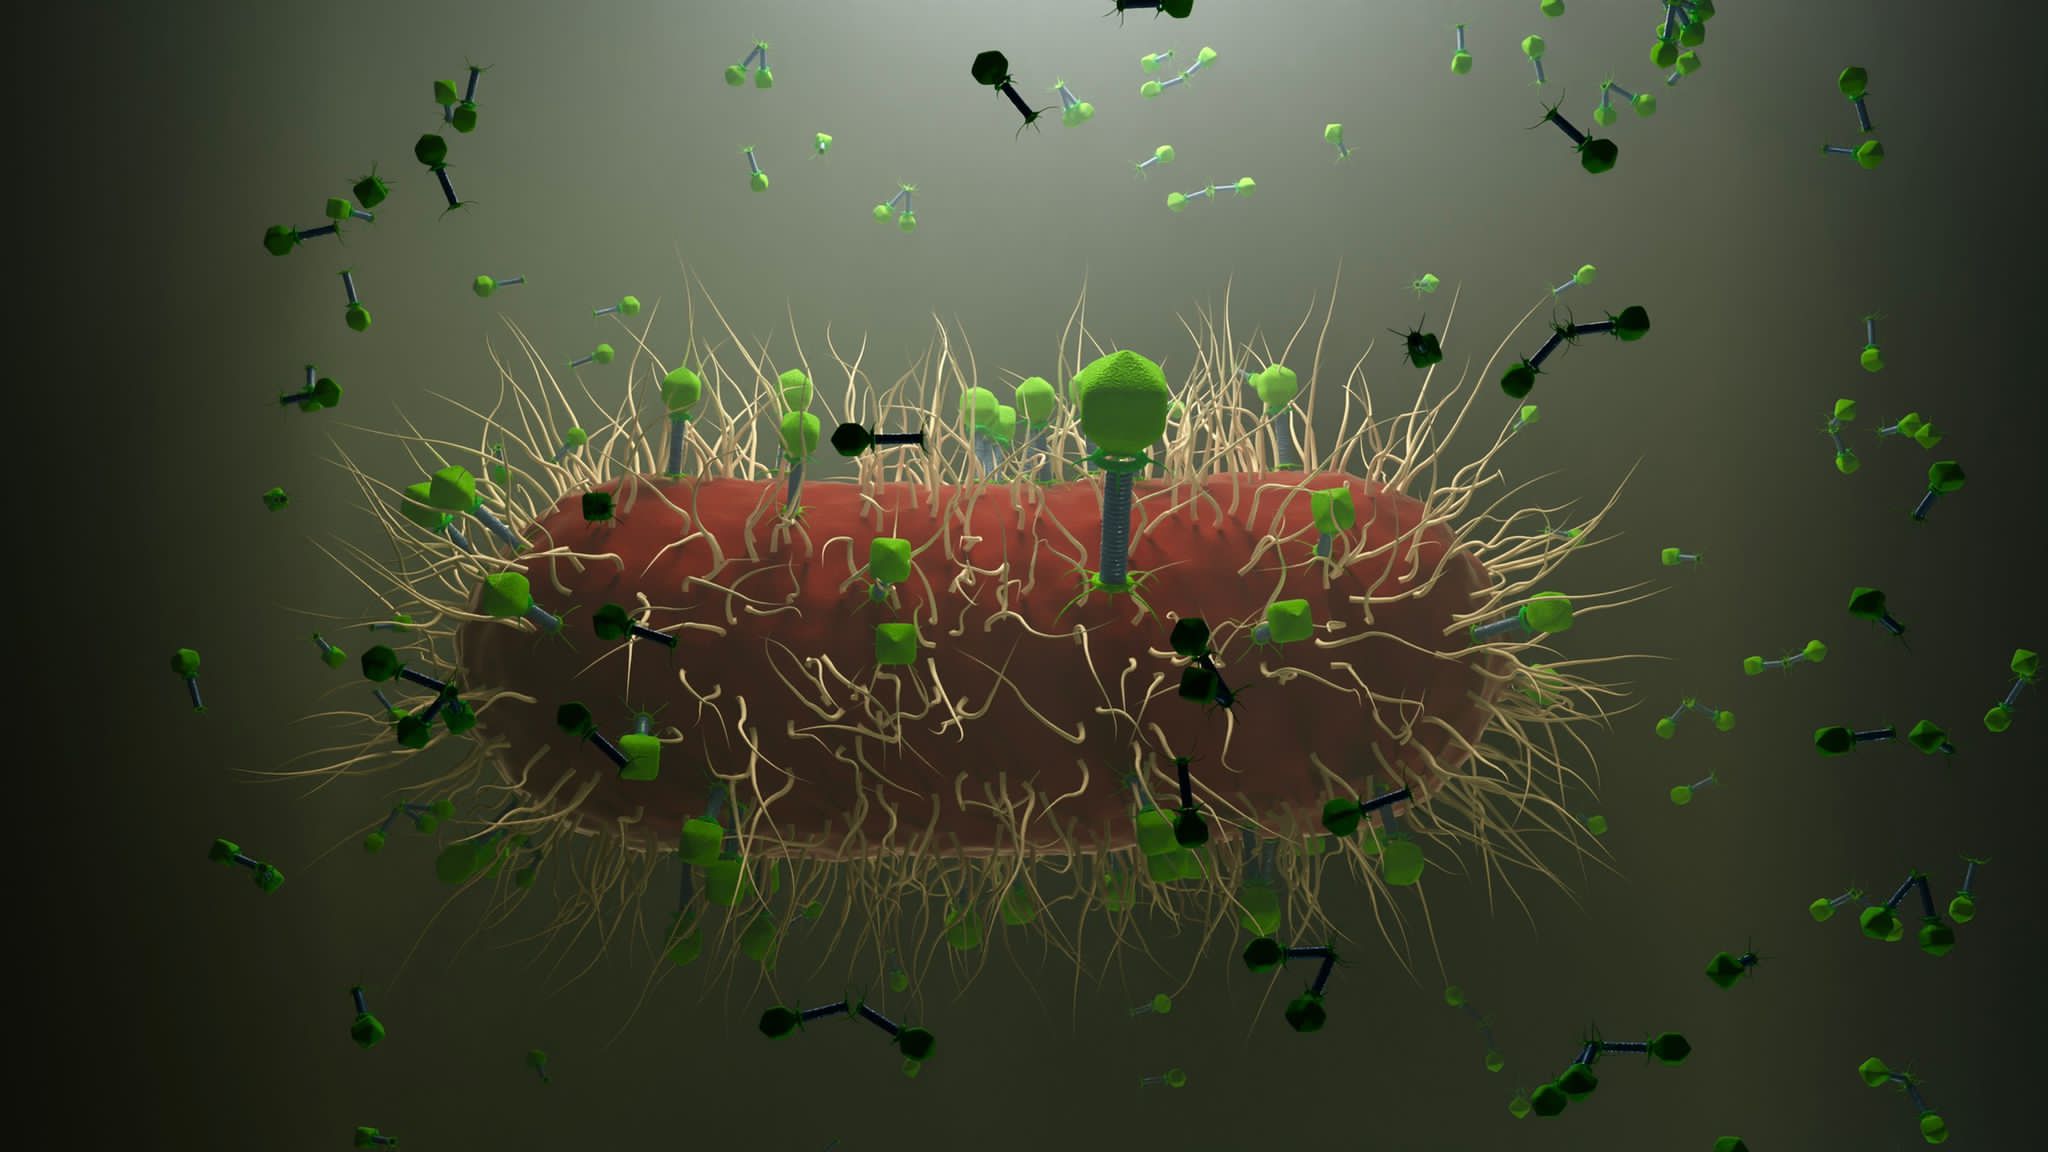 Phages on bacterium